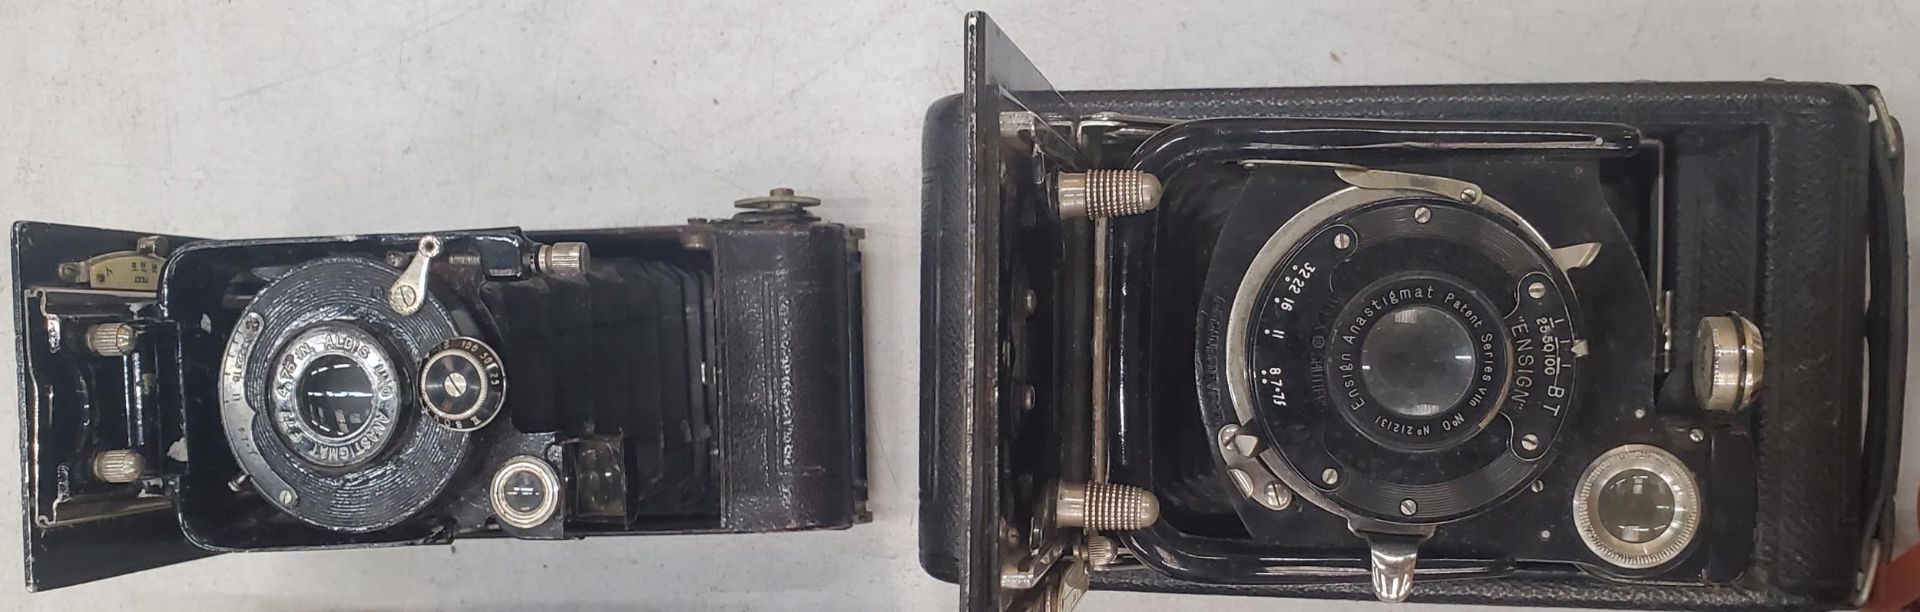 A COLLECTION OF VINTAGE CAMERAS TO INCLUDE BOXED KODAK INSTAMATIC 104, KODAK BROWNIE NO.2 DUO-LUX - Image 2 of 4